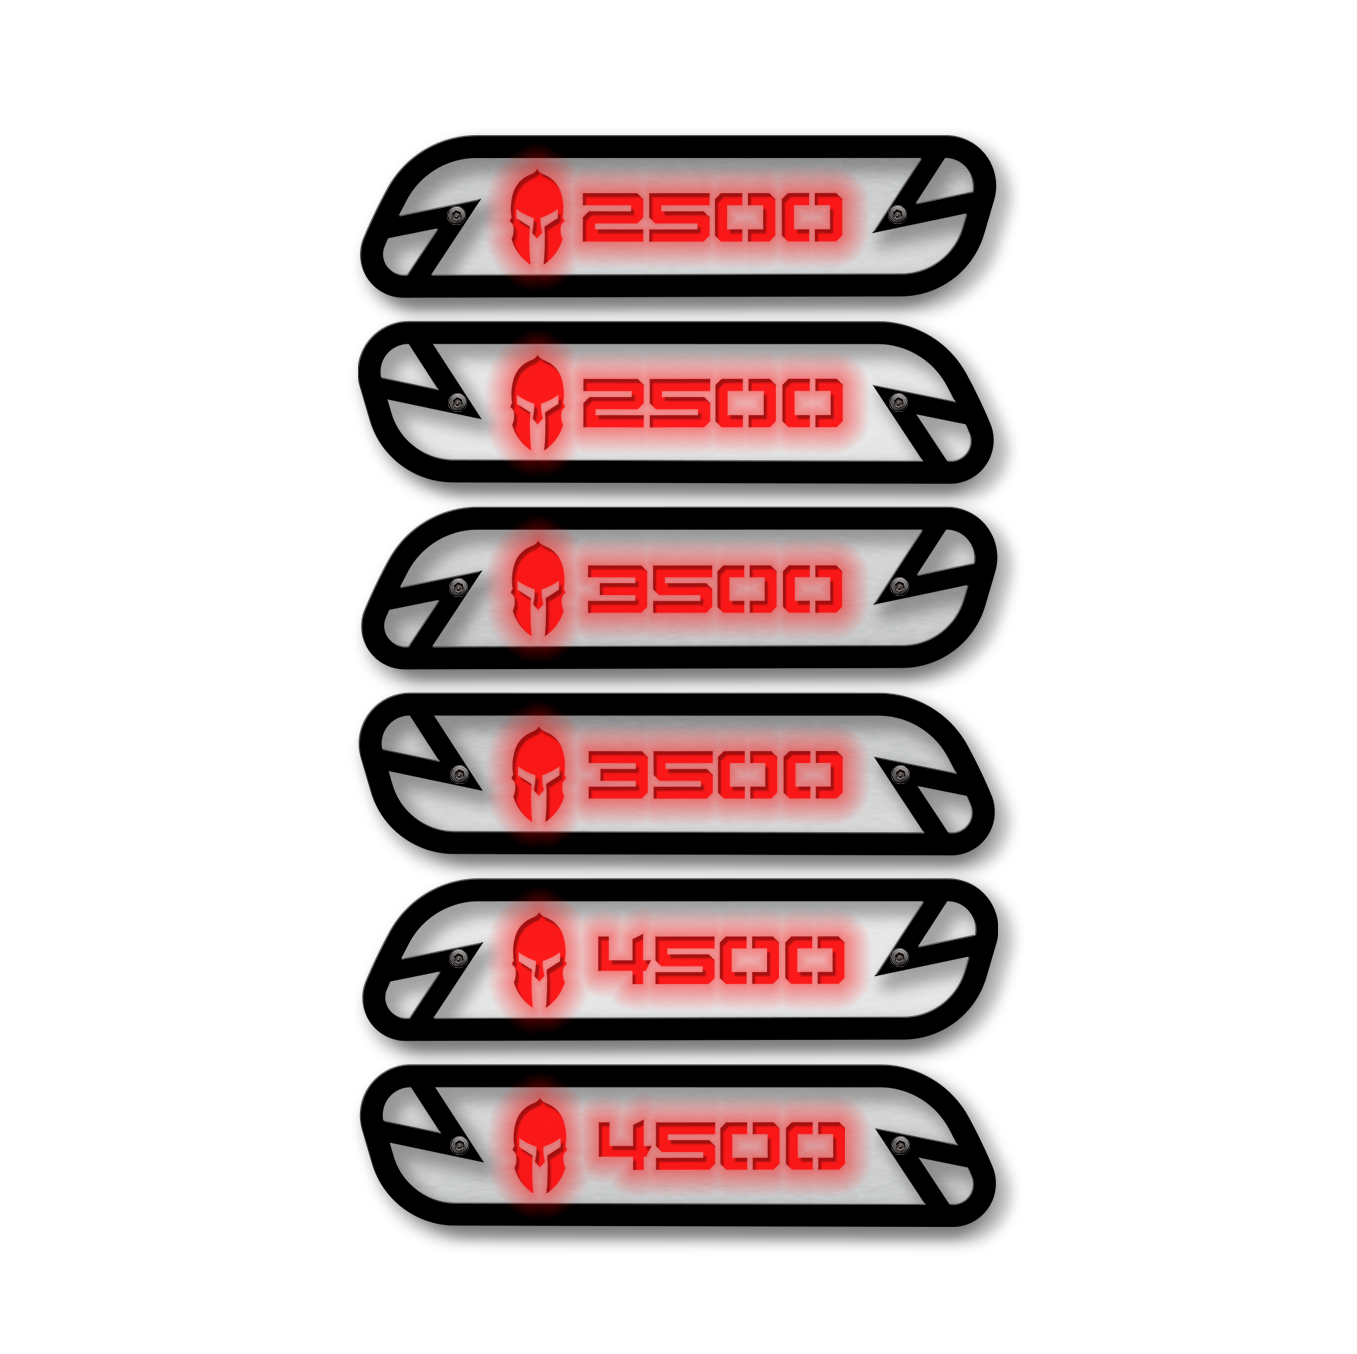 Spartan 2500/3500/4500 Hood Emblem Replacements - Fits 2019-2022 Ram® 2500, 3500, 4500 - Fully Customizable, LED or Non-LED